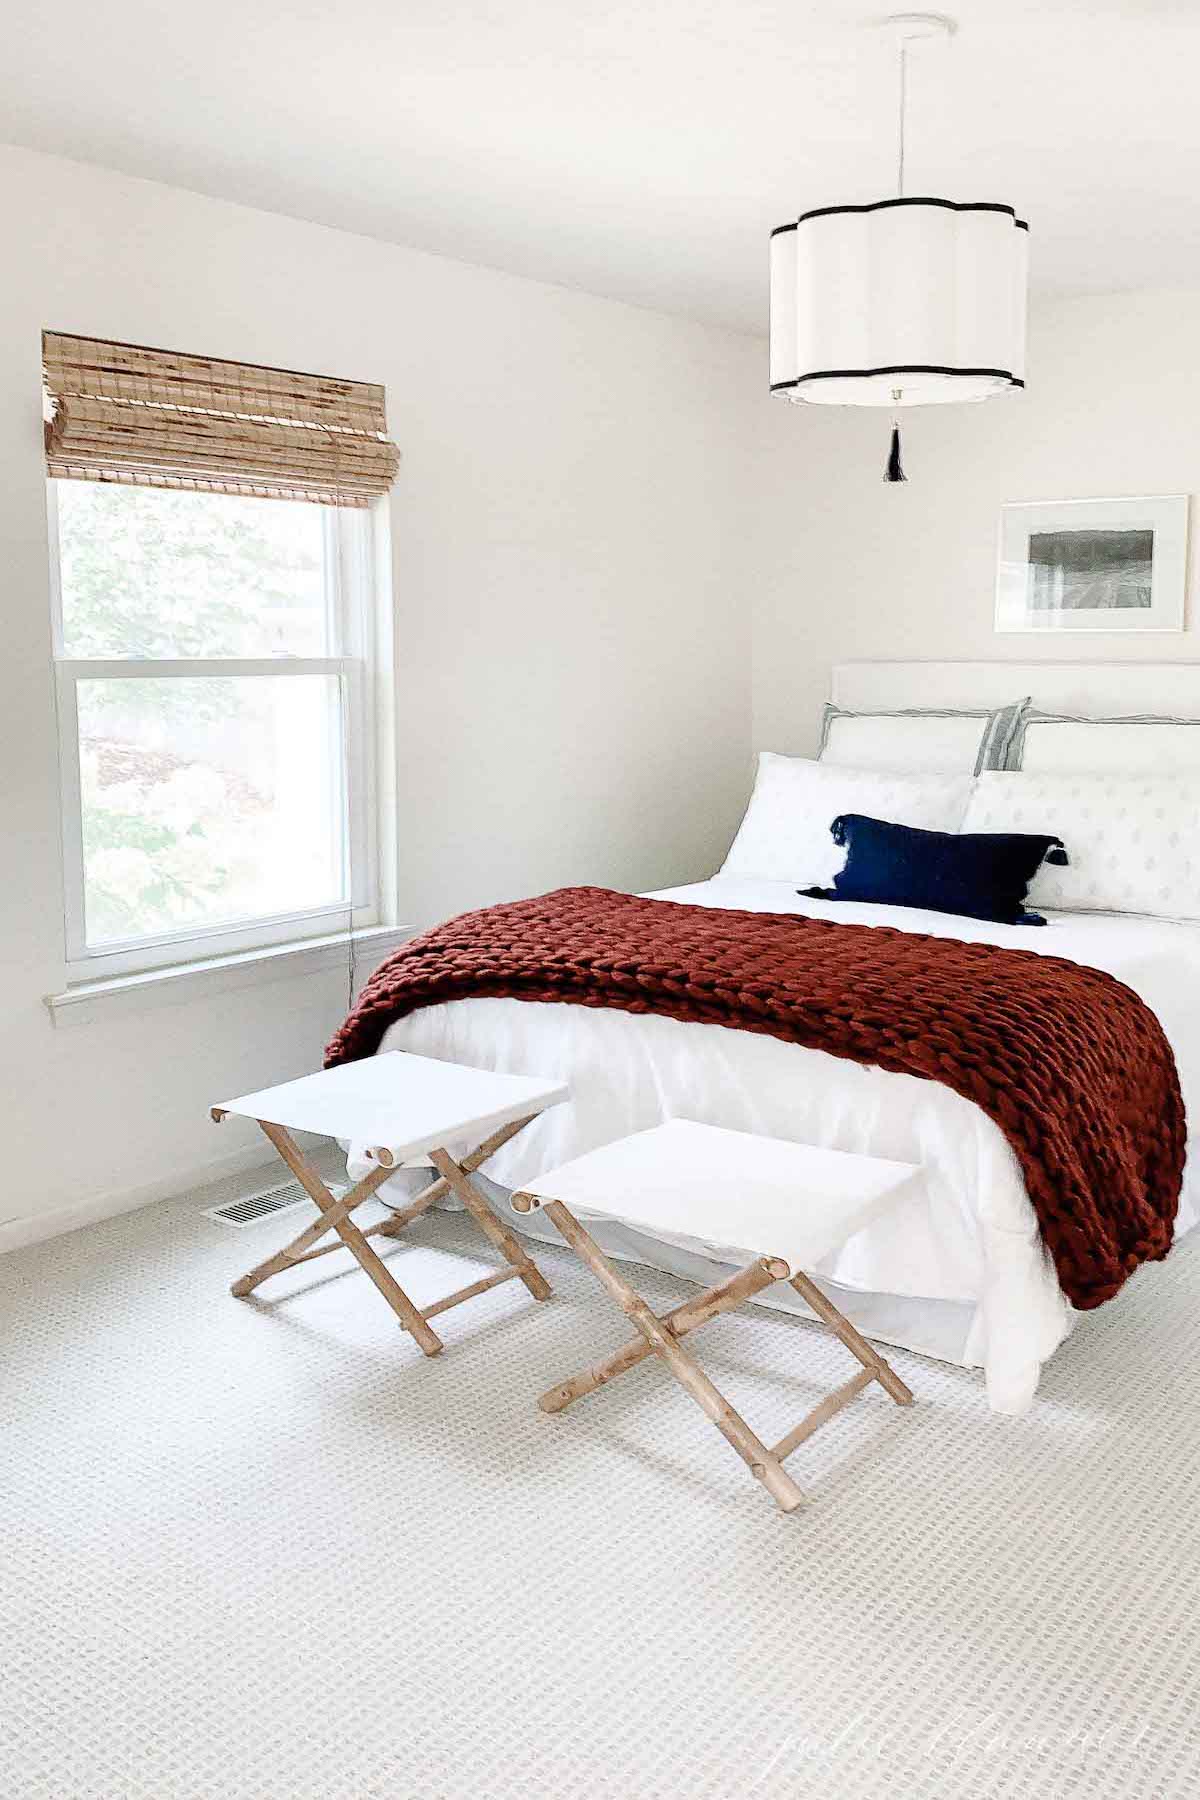 A minimalist white bedroom with a red and white rug.